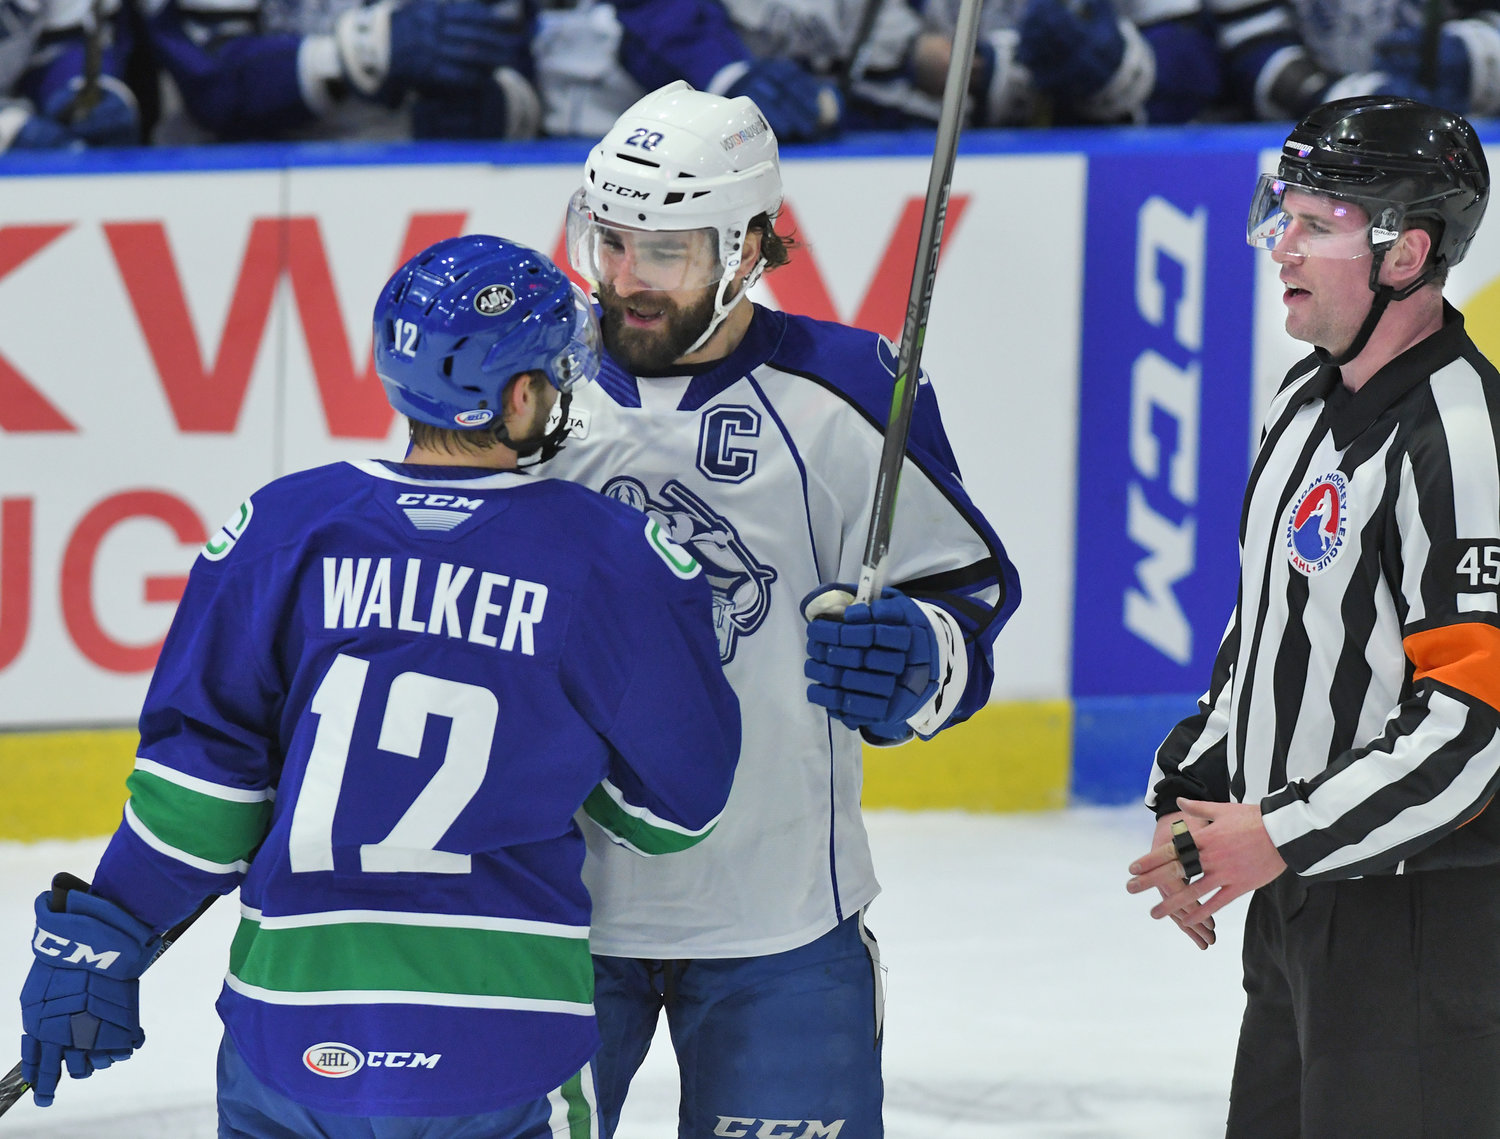 A LITTLE CHAT — Utica Comets’ Nathan Walker and Syracuse Crunch captain Ryan Lohin have a discussion during the first period of the Comets’ home opener Wednesday. Walker scored a power play goal in the second period to help Utica to a 5-2 victory.